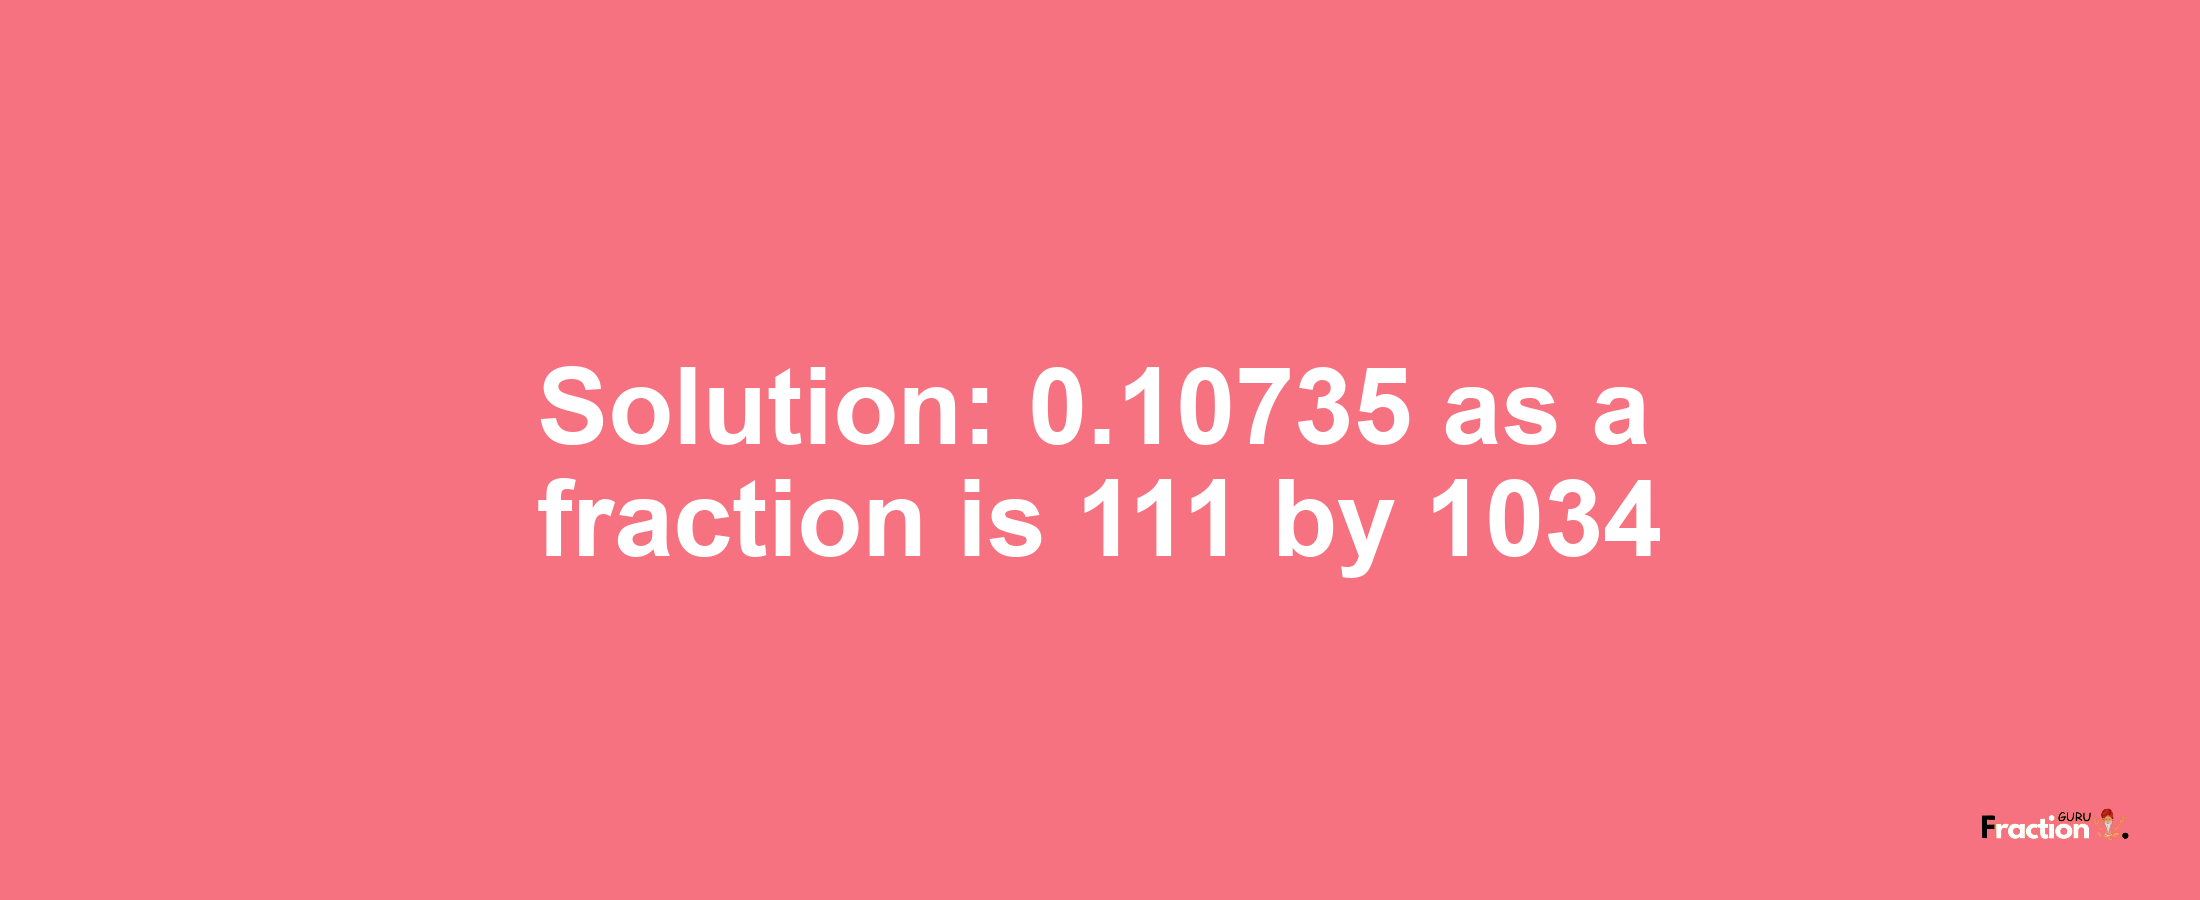 Solution:0.10735 as a fraction is 111/1034